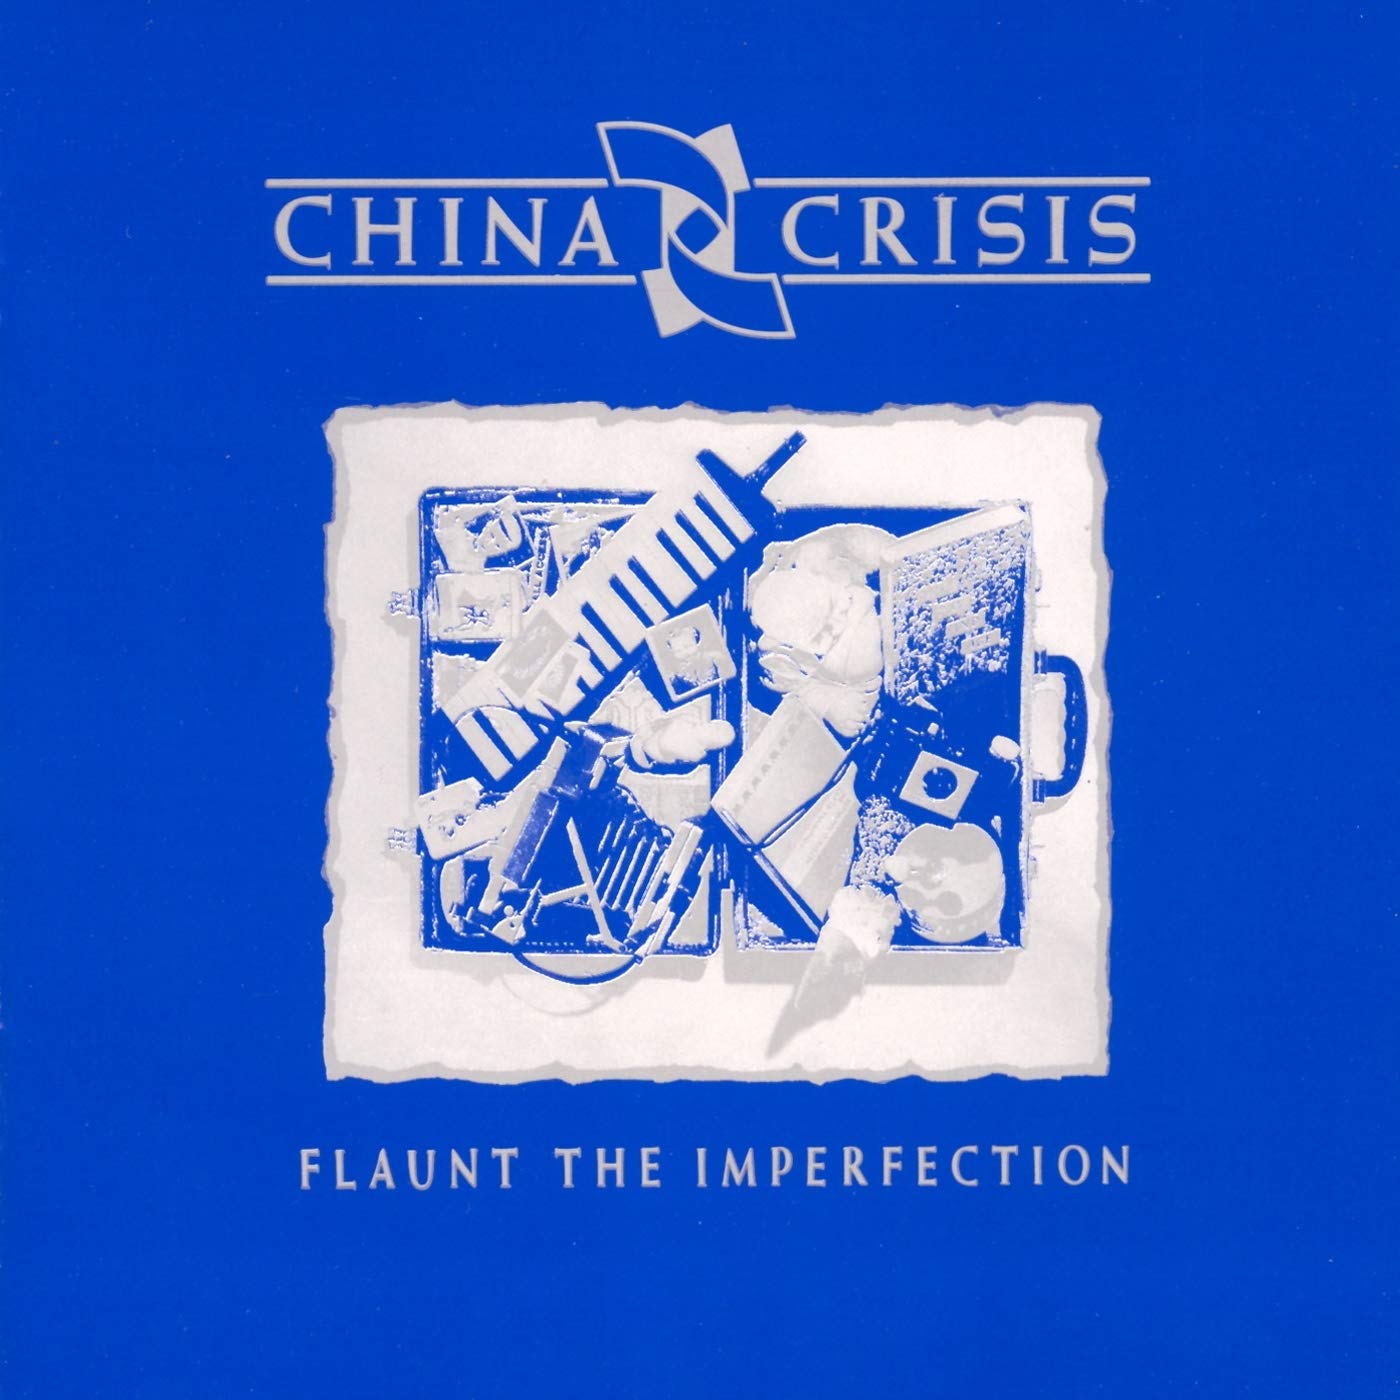 Flaunt the Imperfection by China Crisis